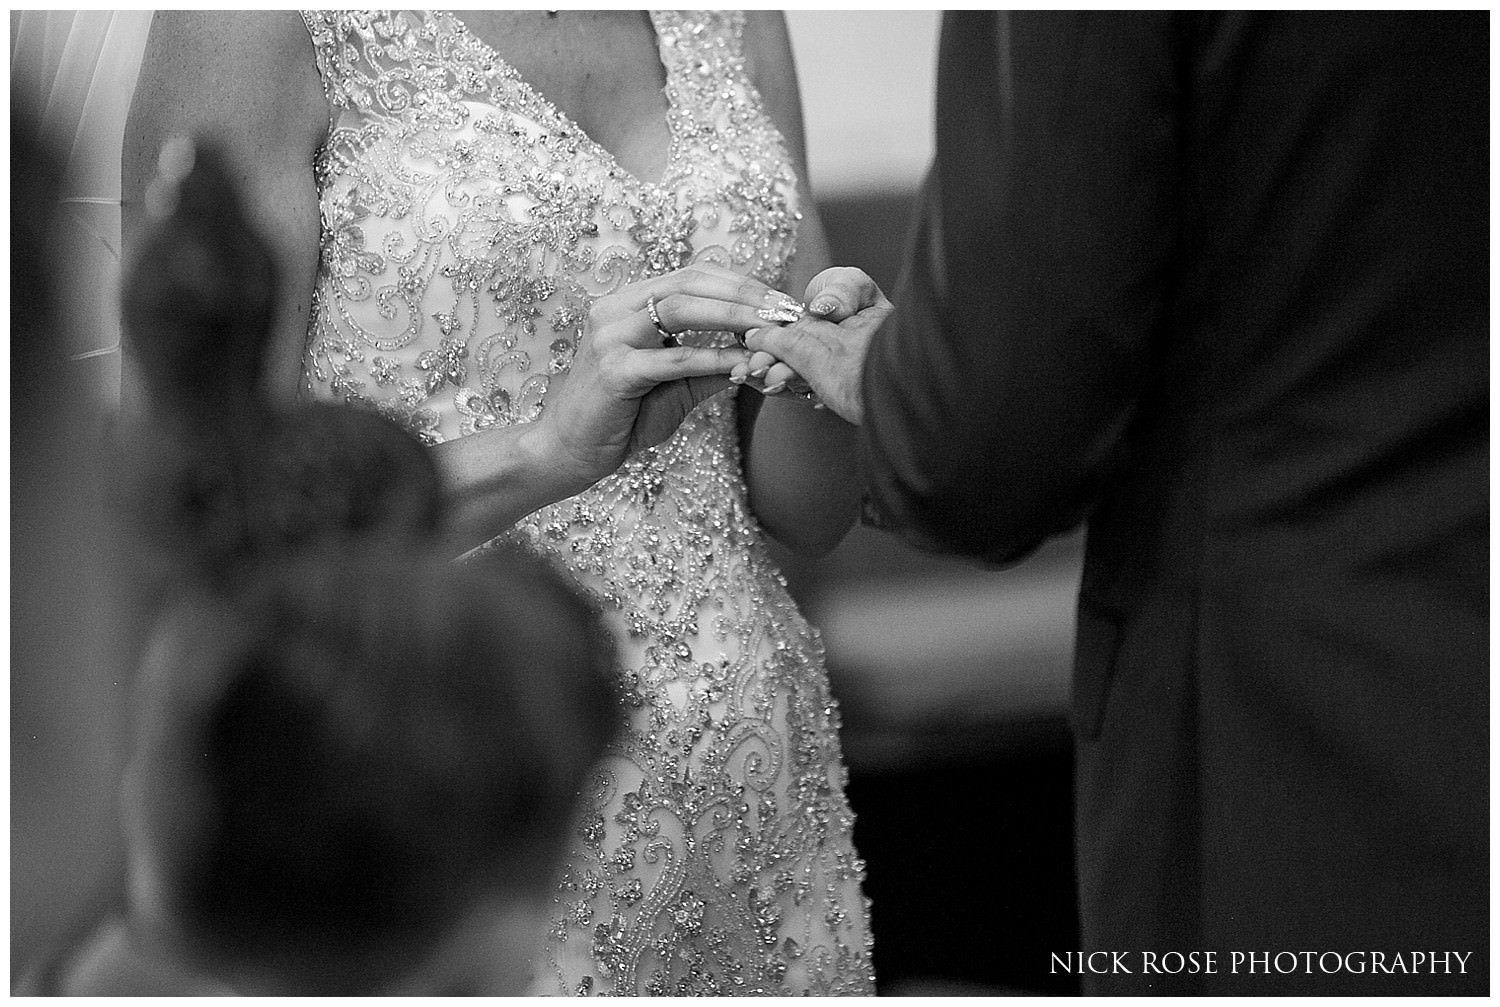  Bride and groom exchanging rings during a church wedding ceremony at St Mary's in Tickhill 